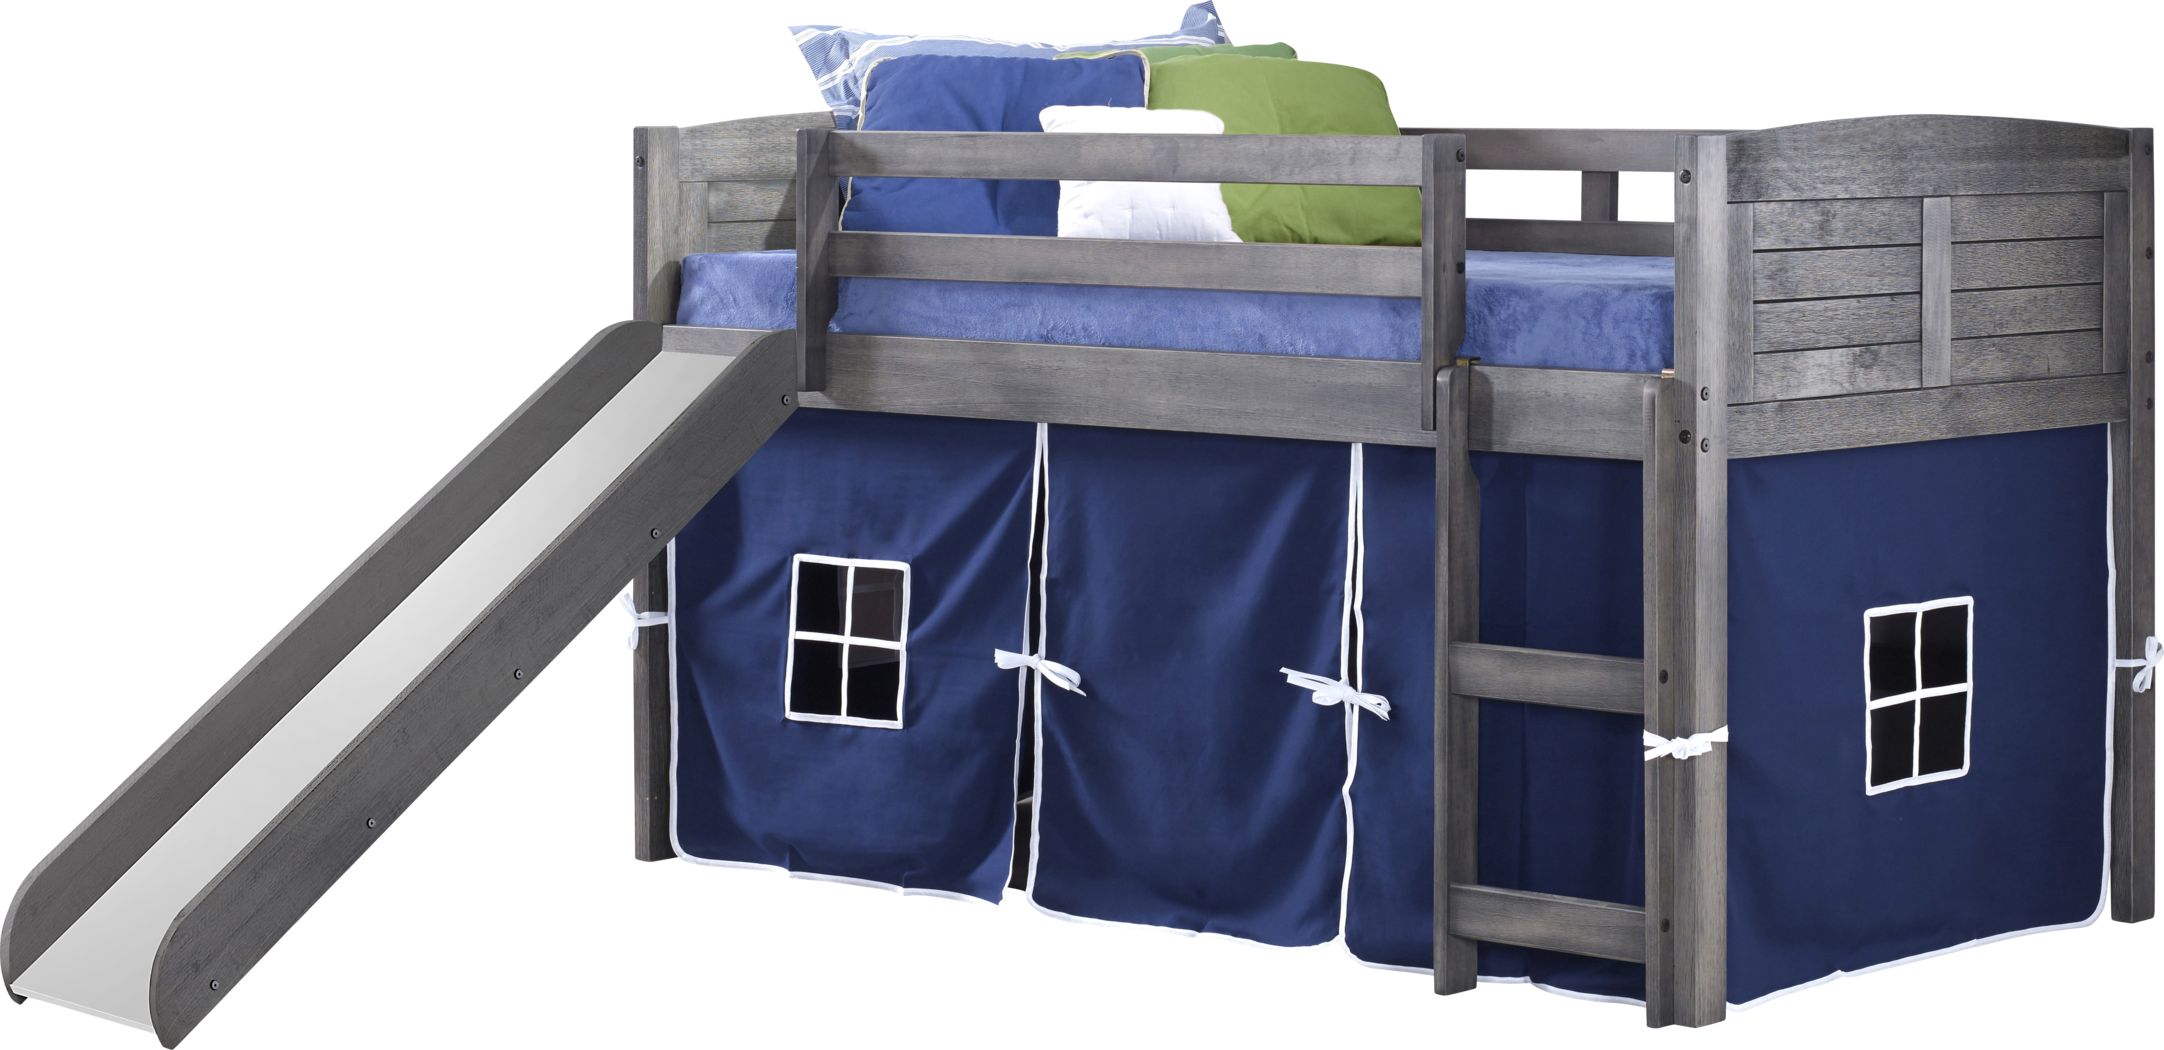 Loft Beds With Slide Underneath, Boys Twin Loft Bed With Slide